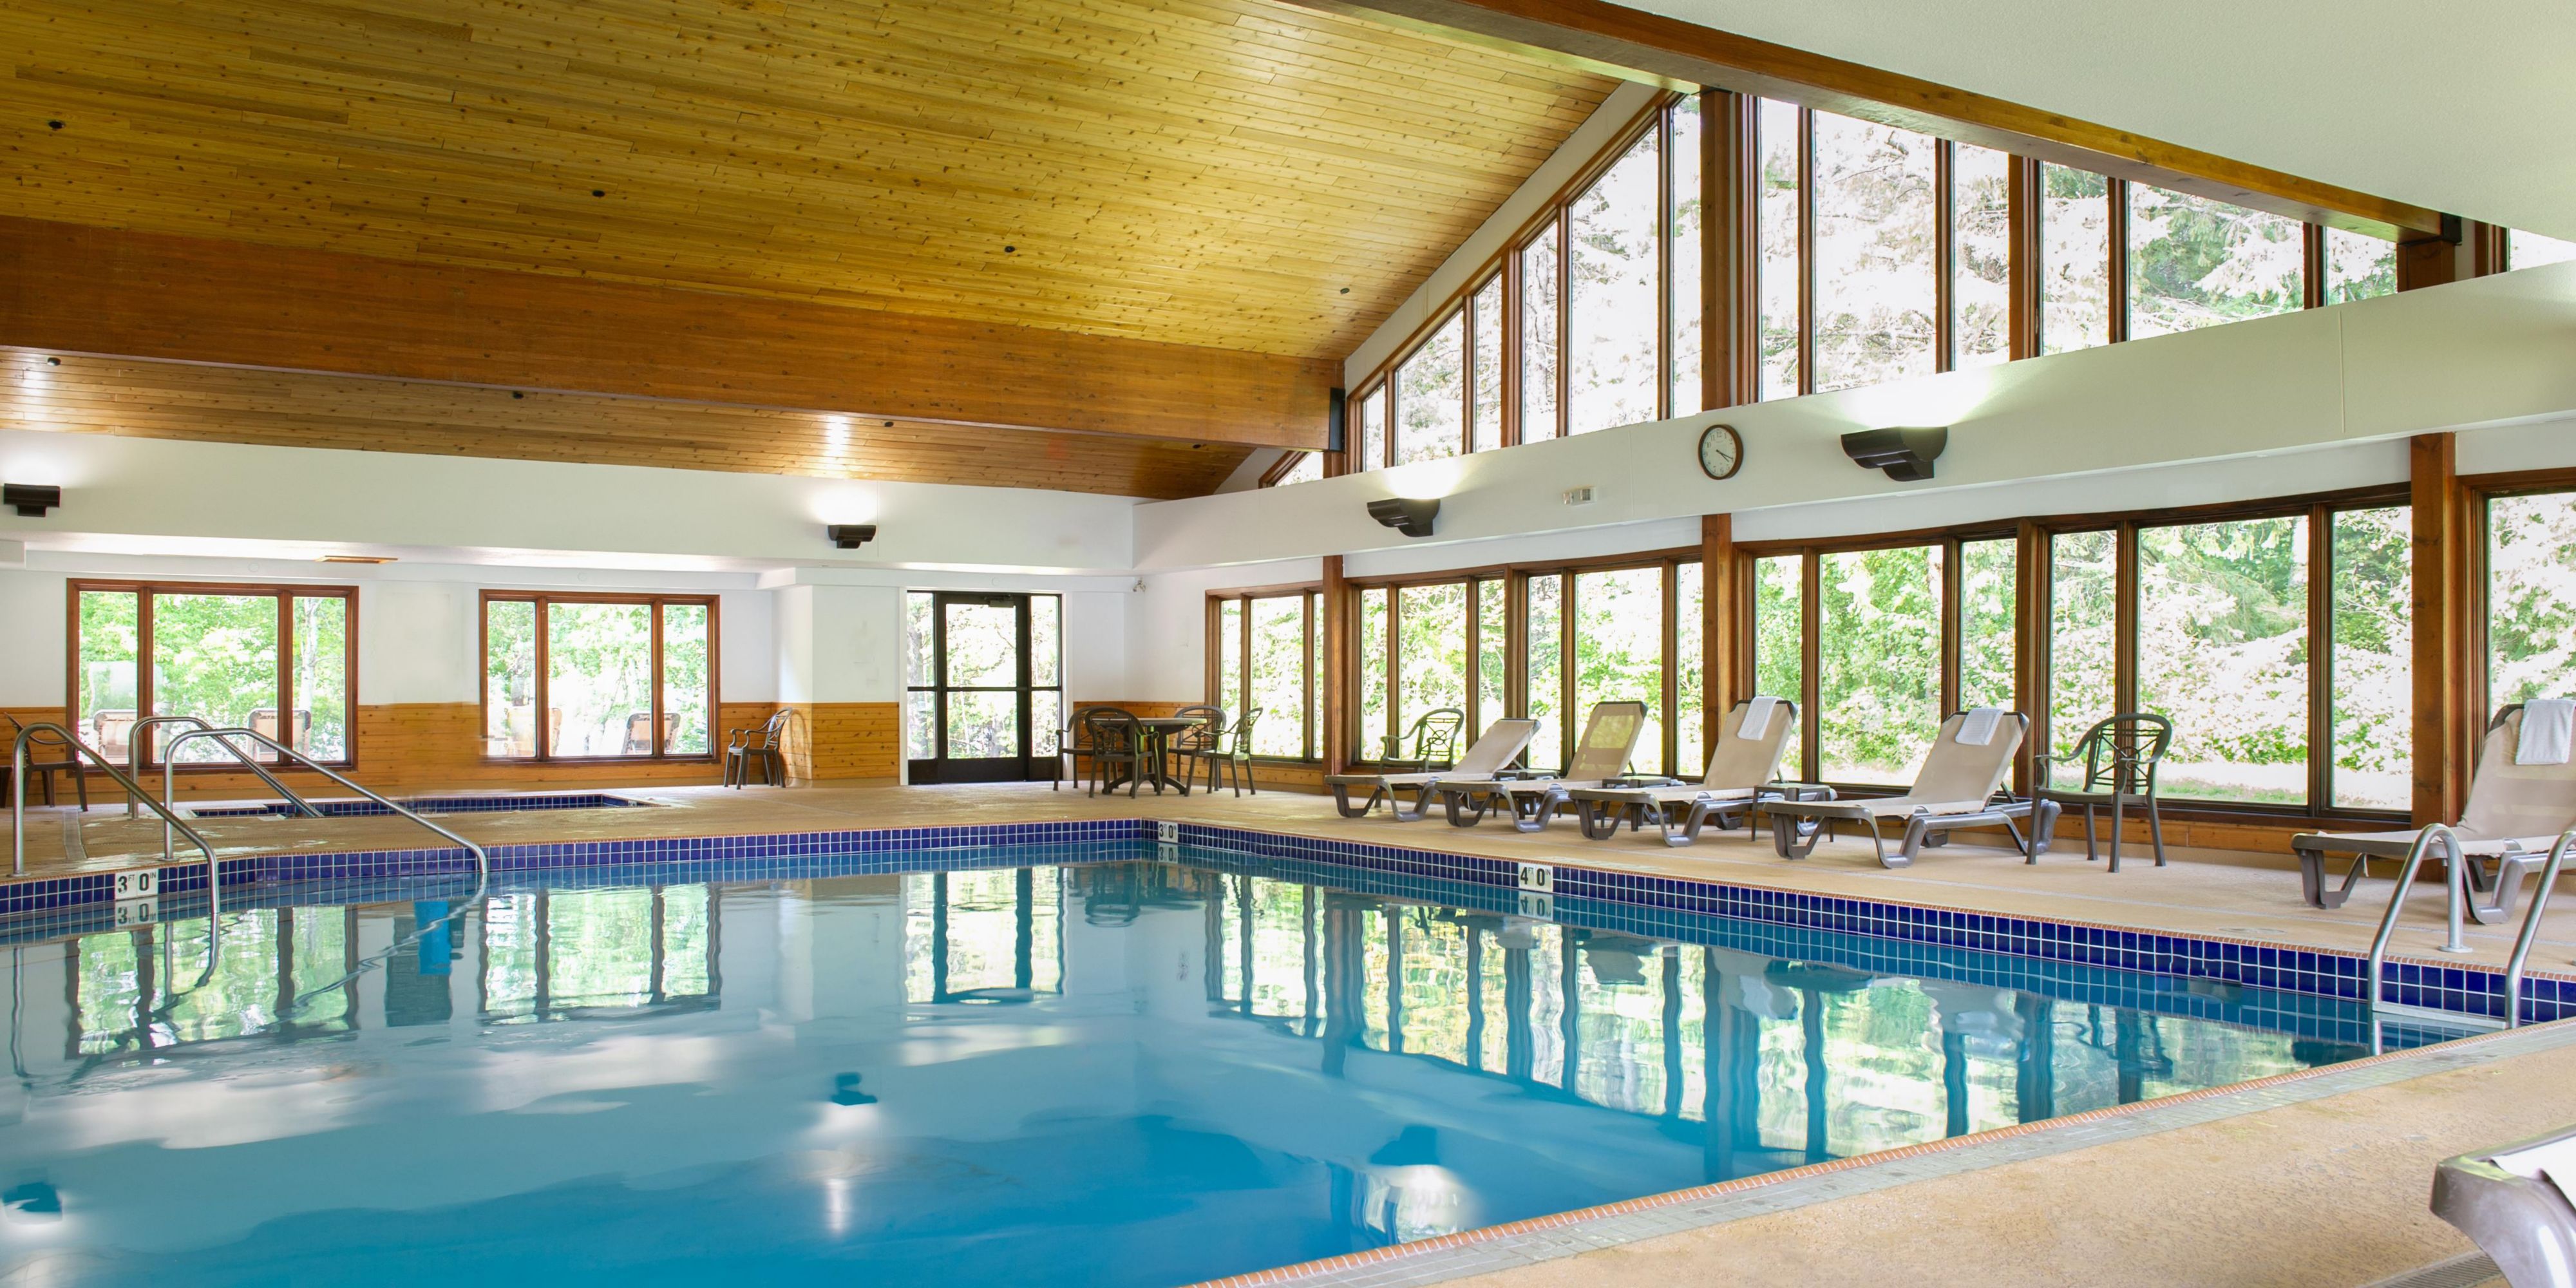 Rain or Shine, you can always take a dip at our Indoor Heated Pool.